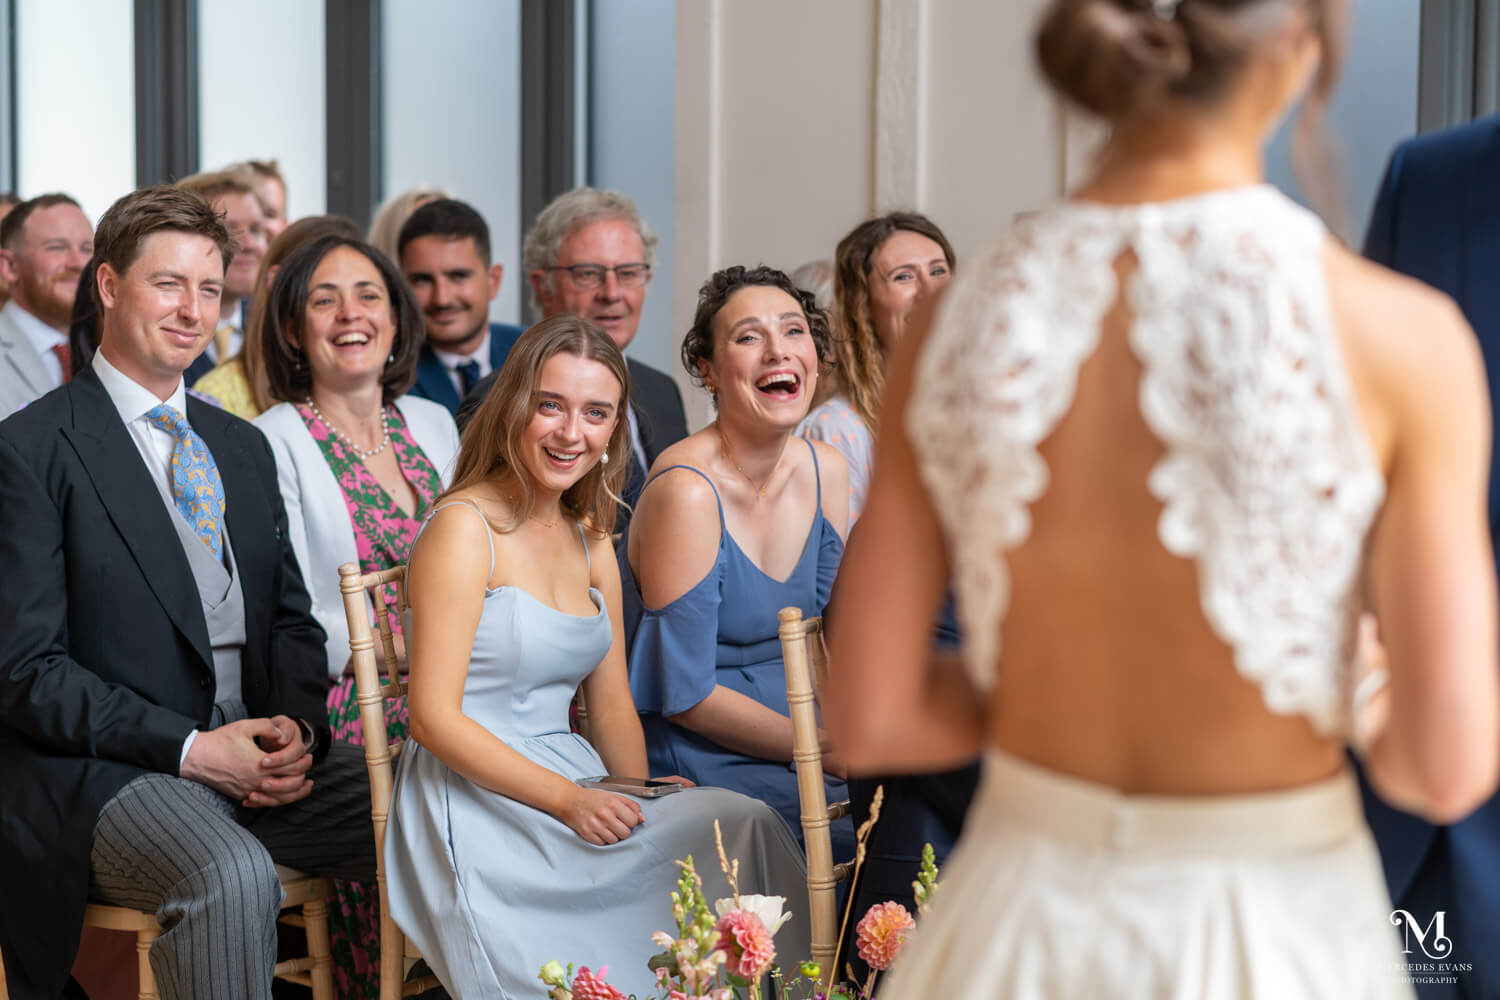 laughing guests watch during the wedding ceremony